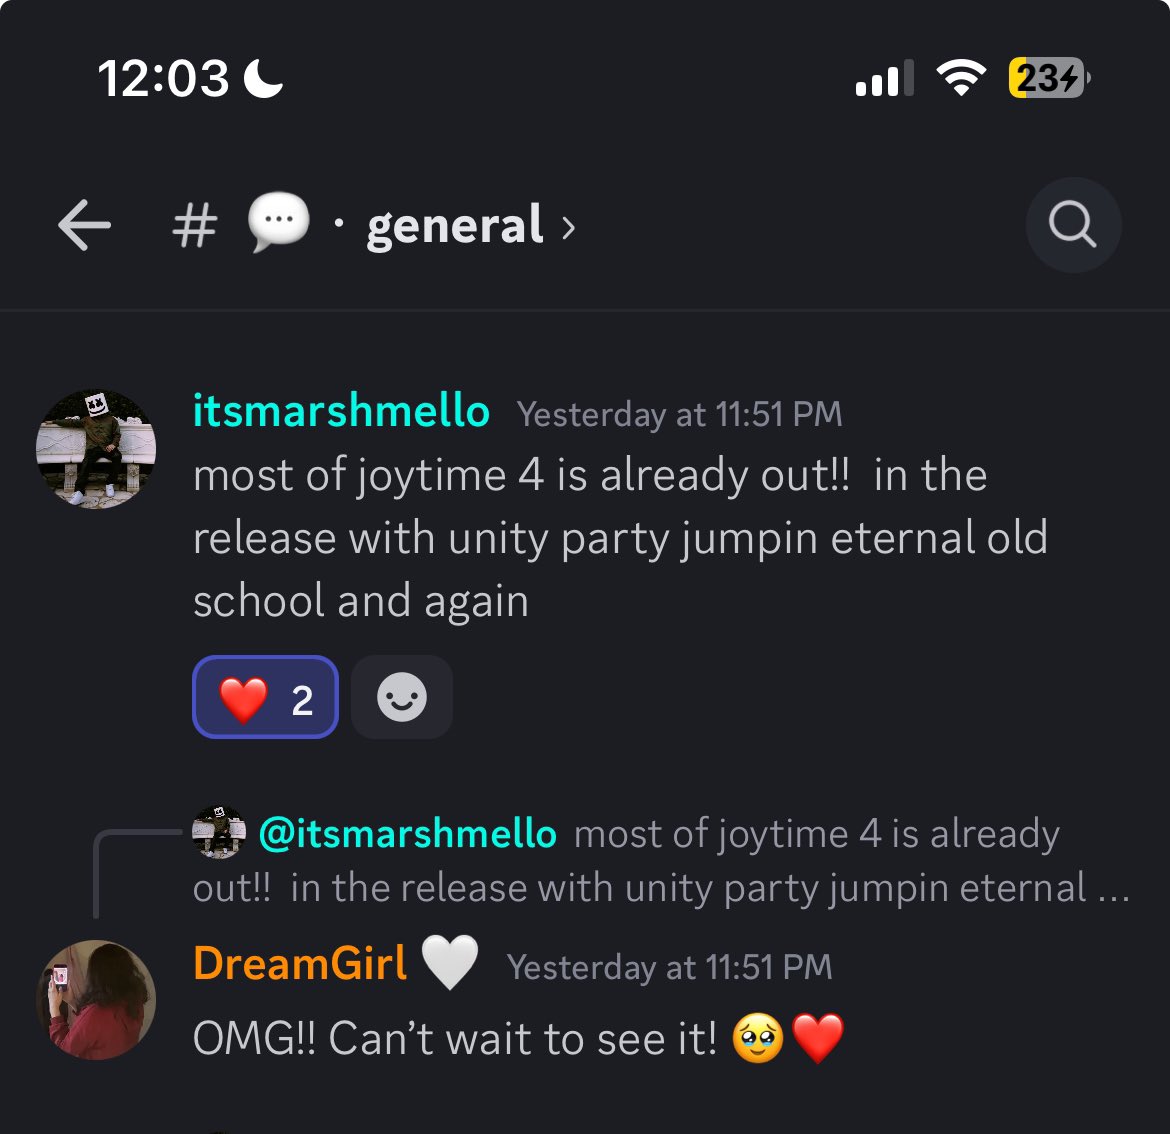 Marshmello announced this on discord, I’m so happy Joytime IV is already out.. I can’t wait!! 🥹❤️